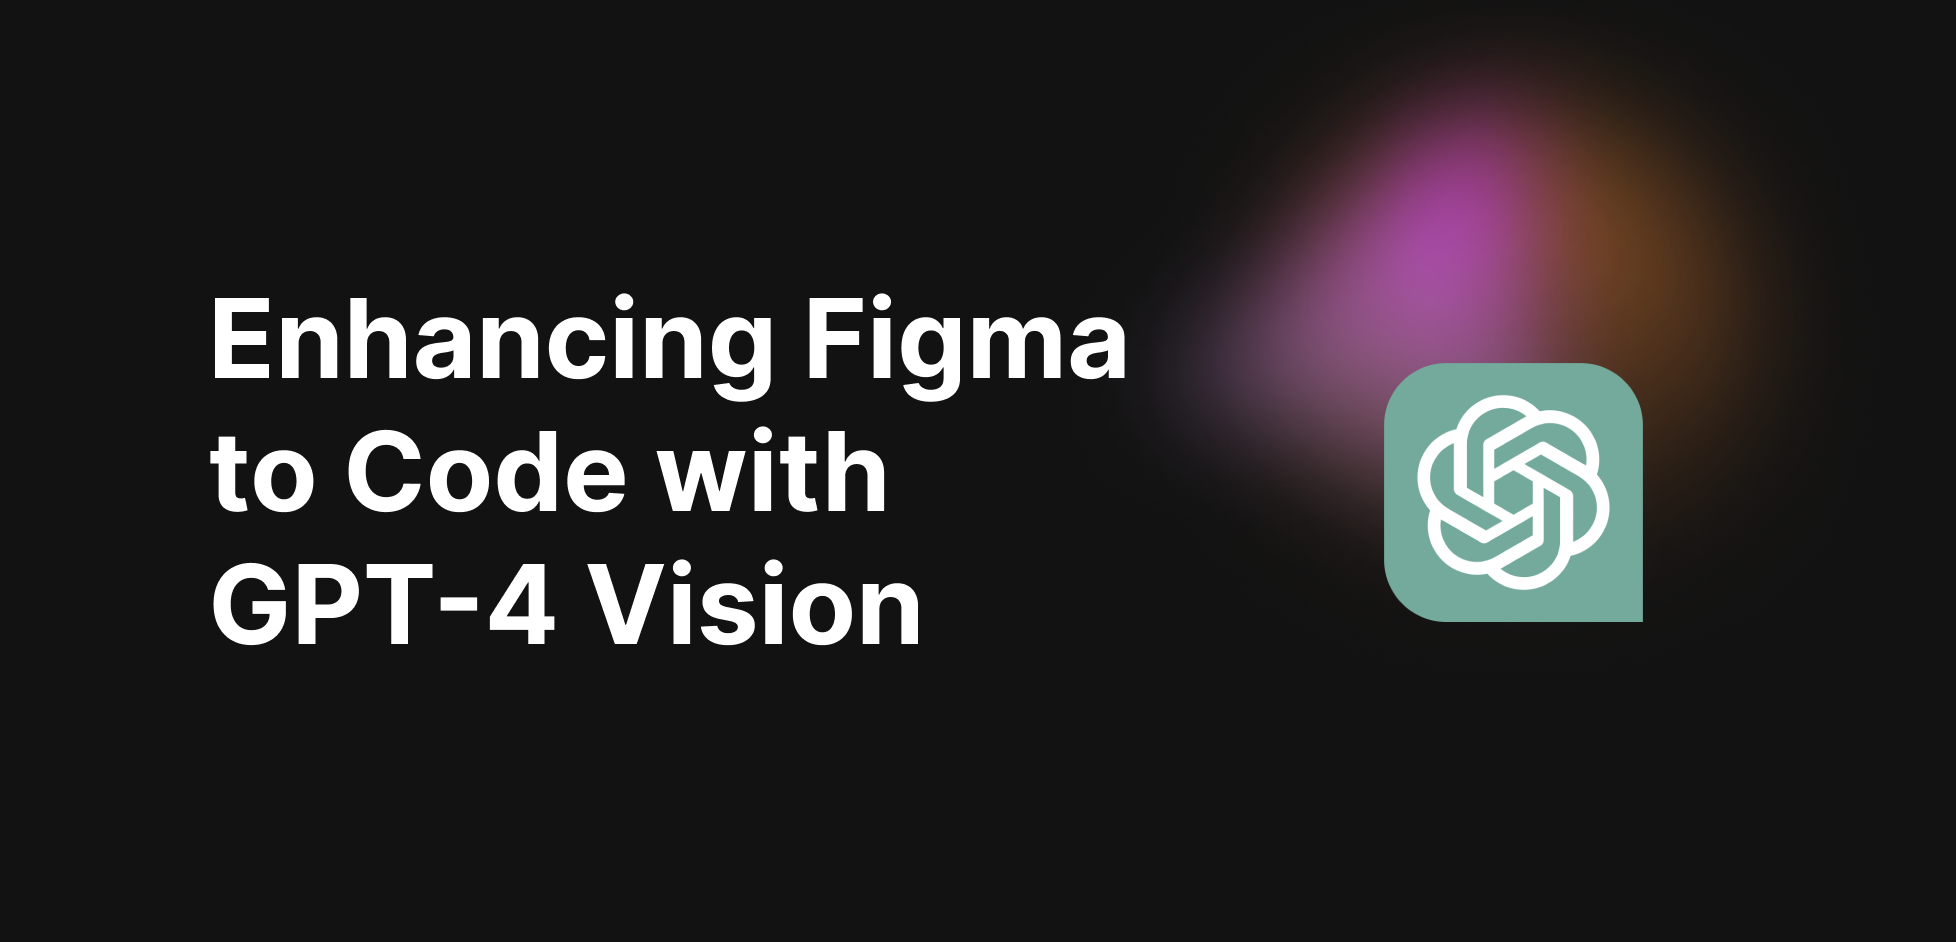 Enhancing Figma to code with GPT-4 Vision